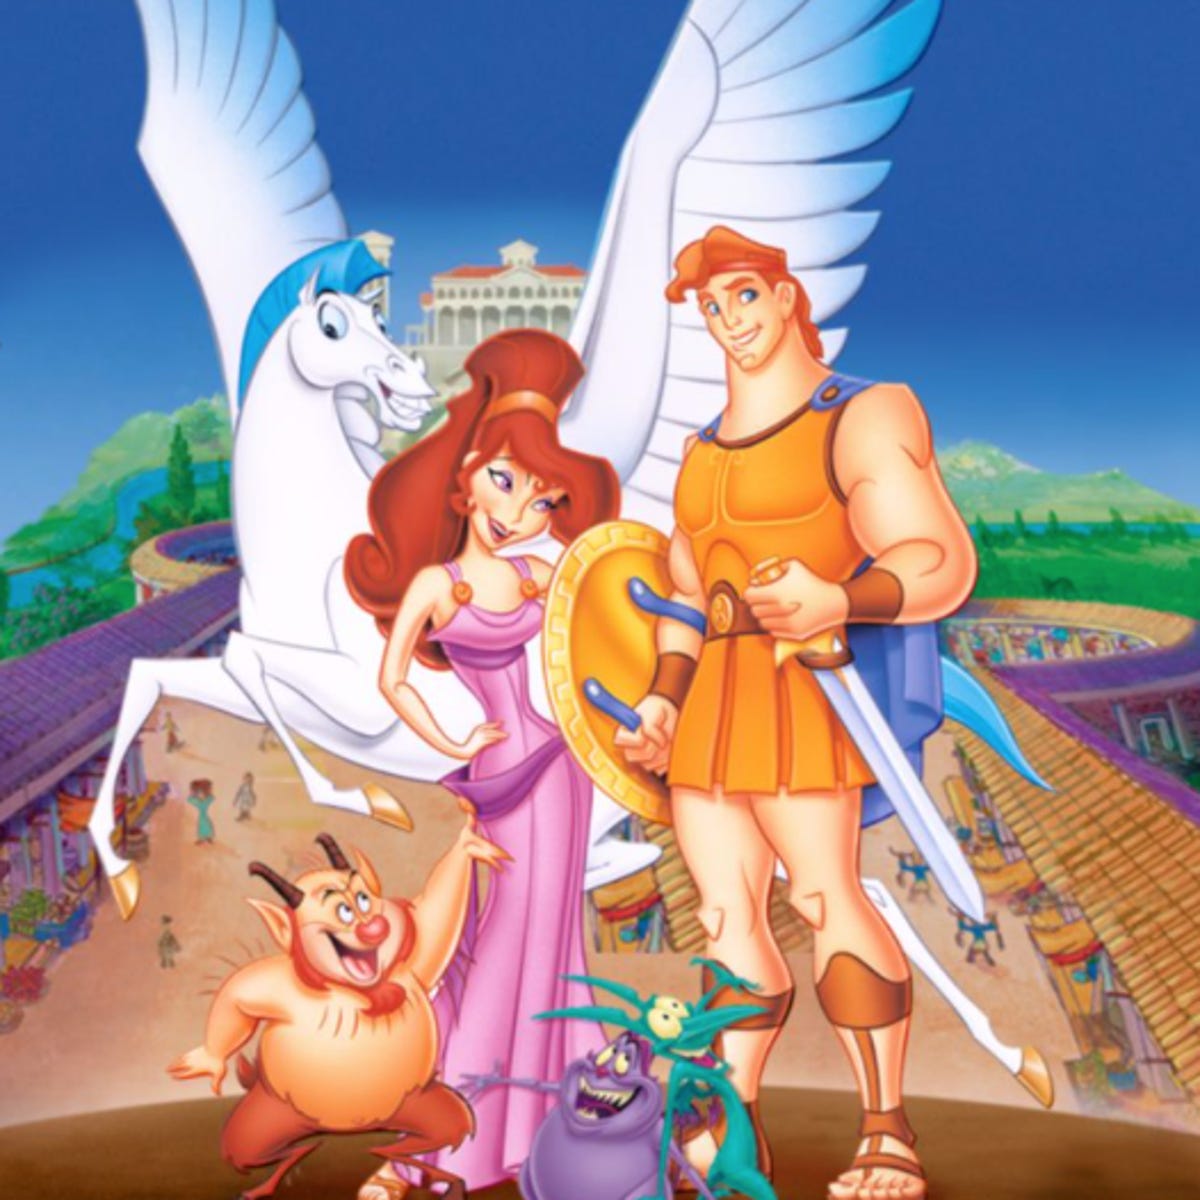 Disney is reportedly planning a live-action Hercules movie - CNET